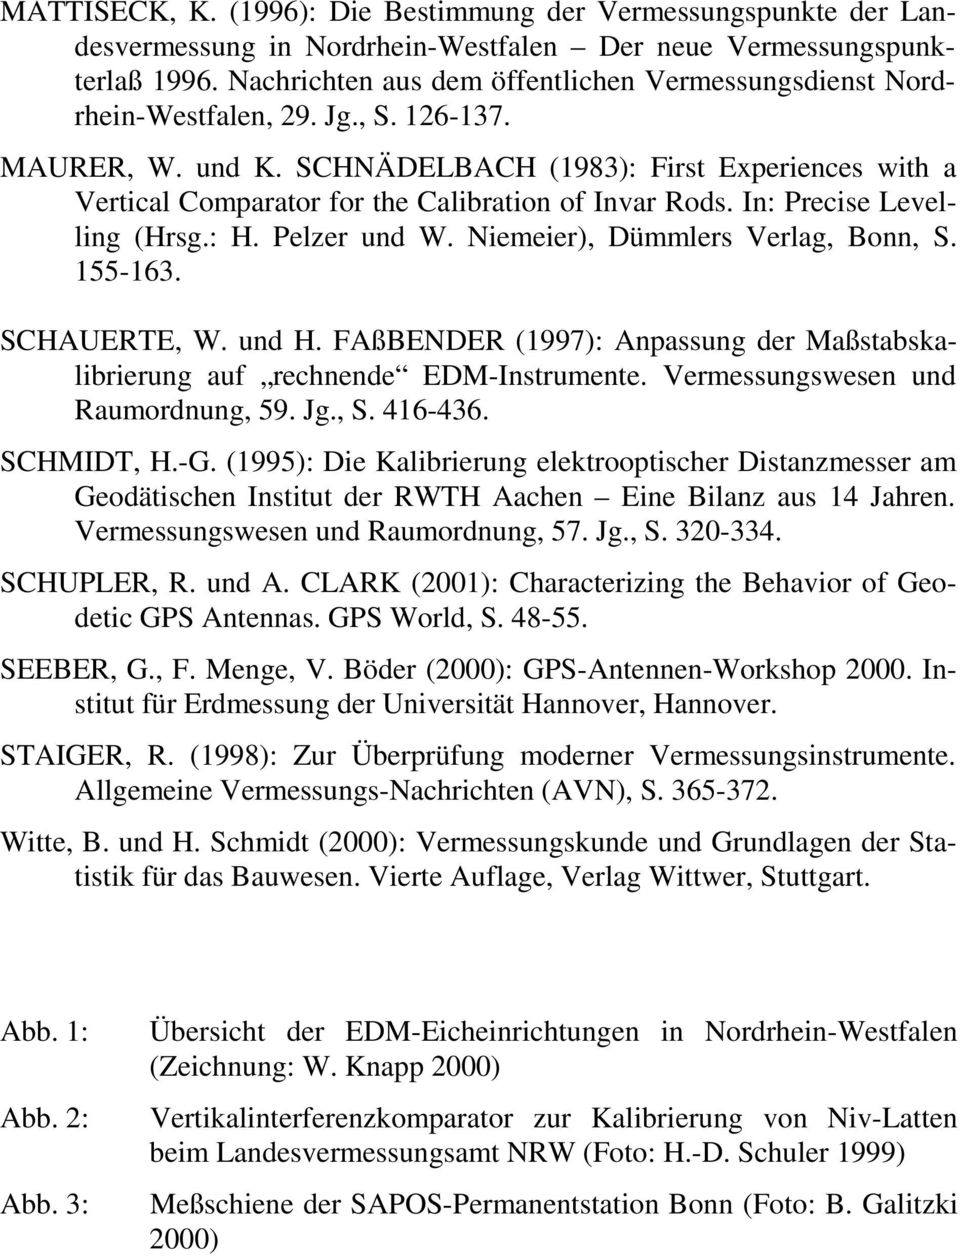 SCHNÄDELBACH (1983): First Experiences with a Vertical Comparator for the Calibration of Invar Rods. In: Precise Levelling (Hrsg.: H. Pelzer und W. Niemeier), Dümmlers Verlag, Bonn, S. 155-163.